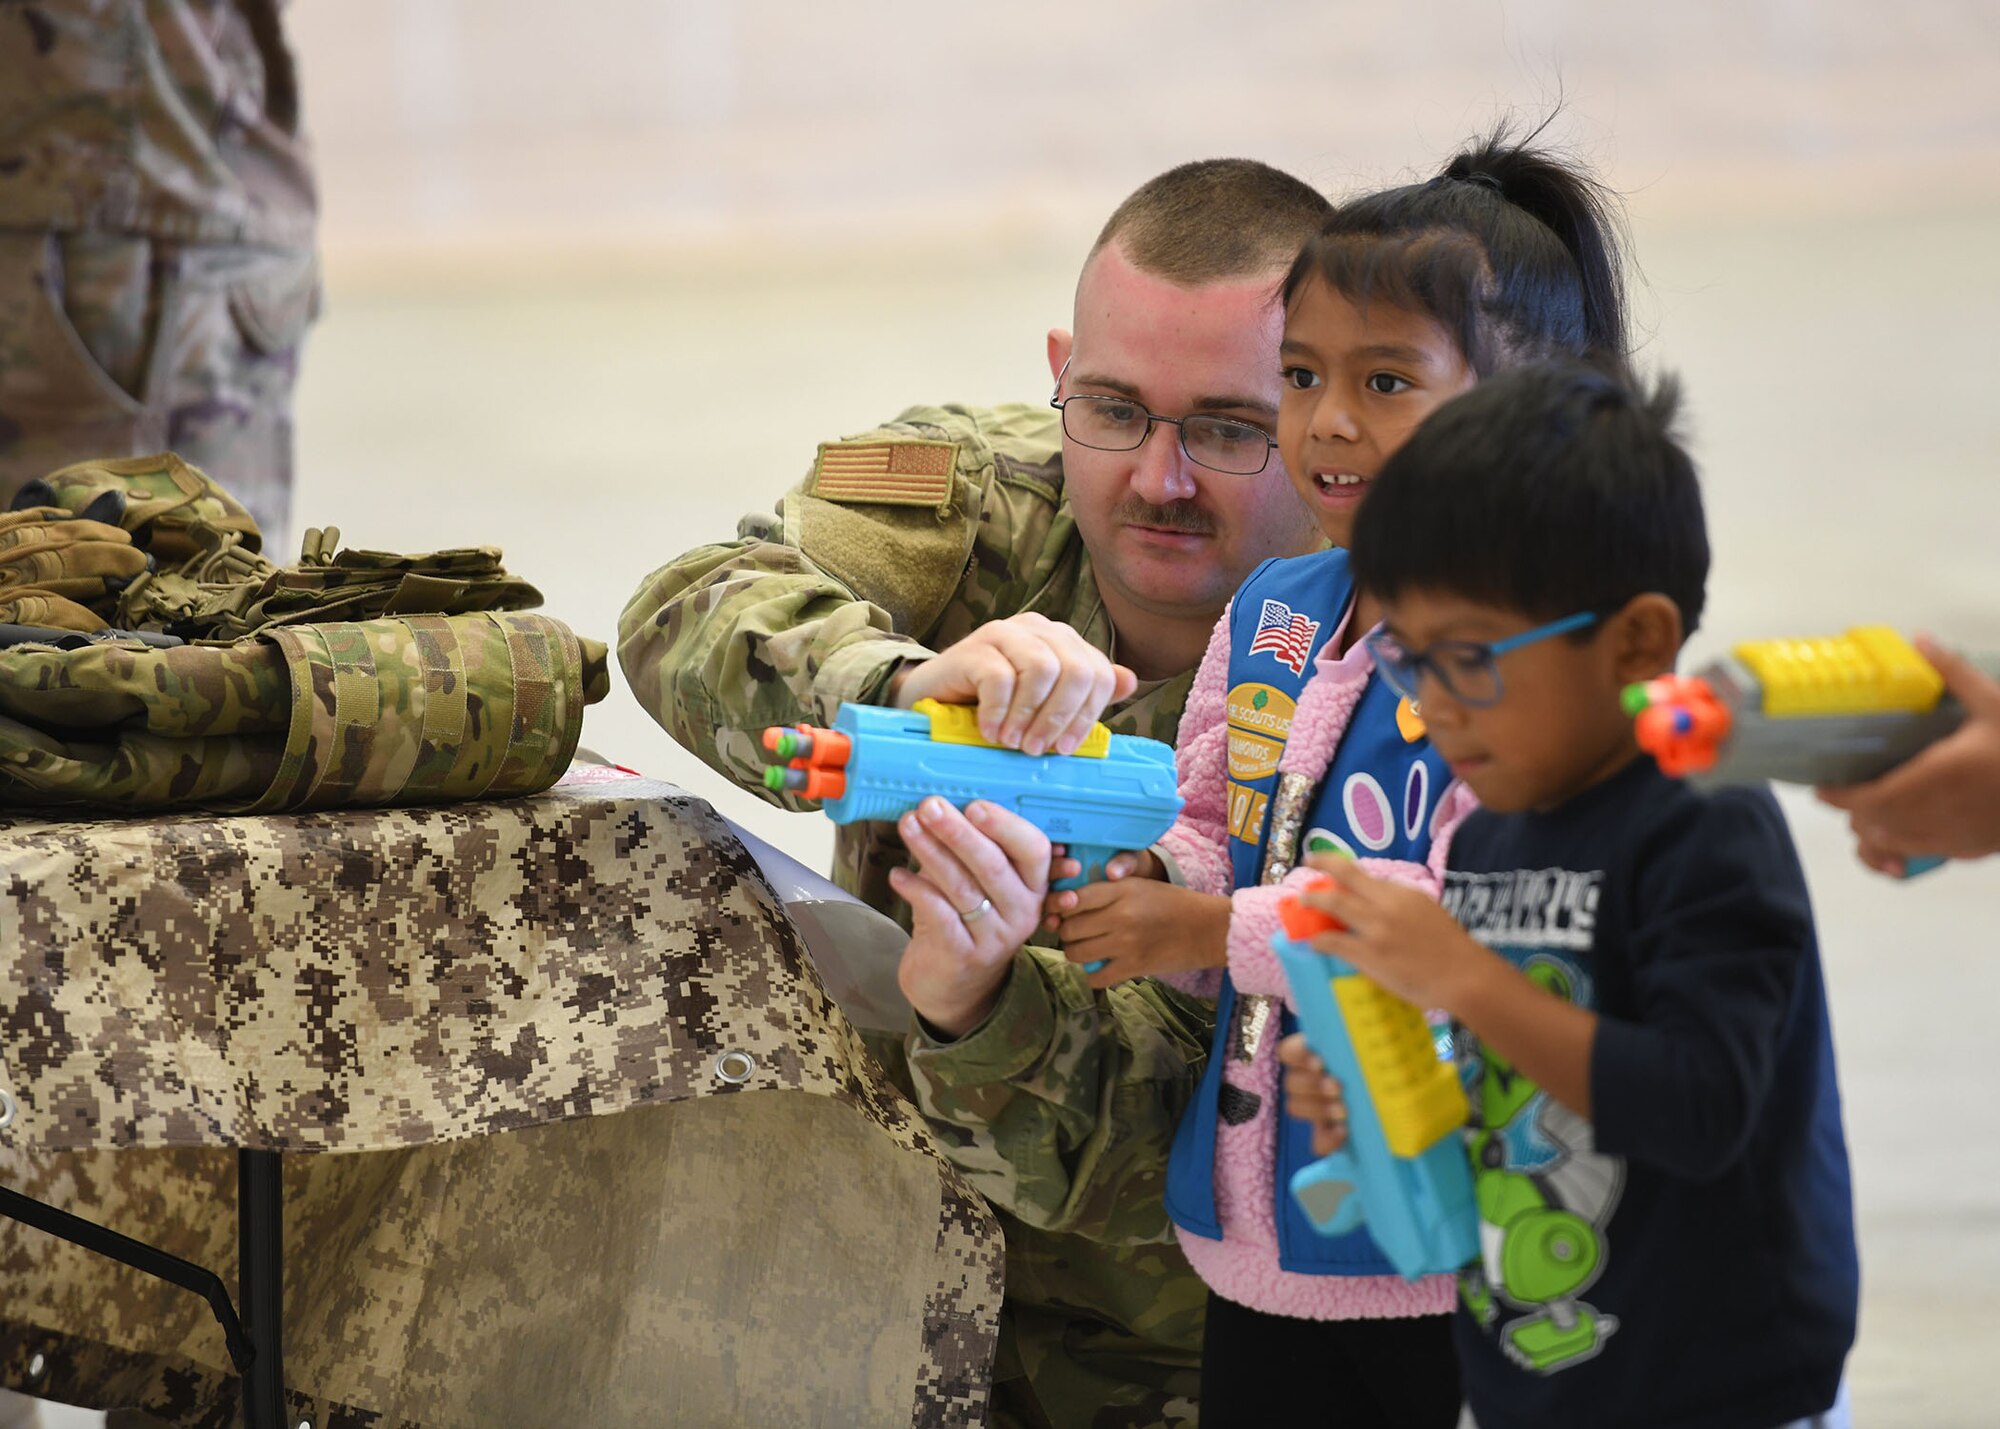 An Airman helps children with a toy.